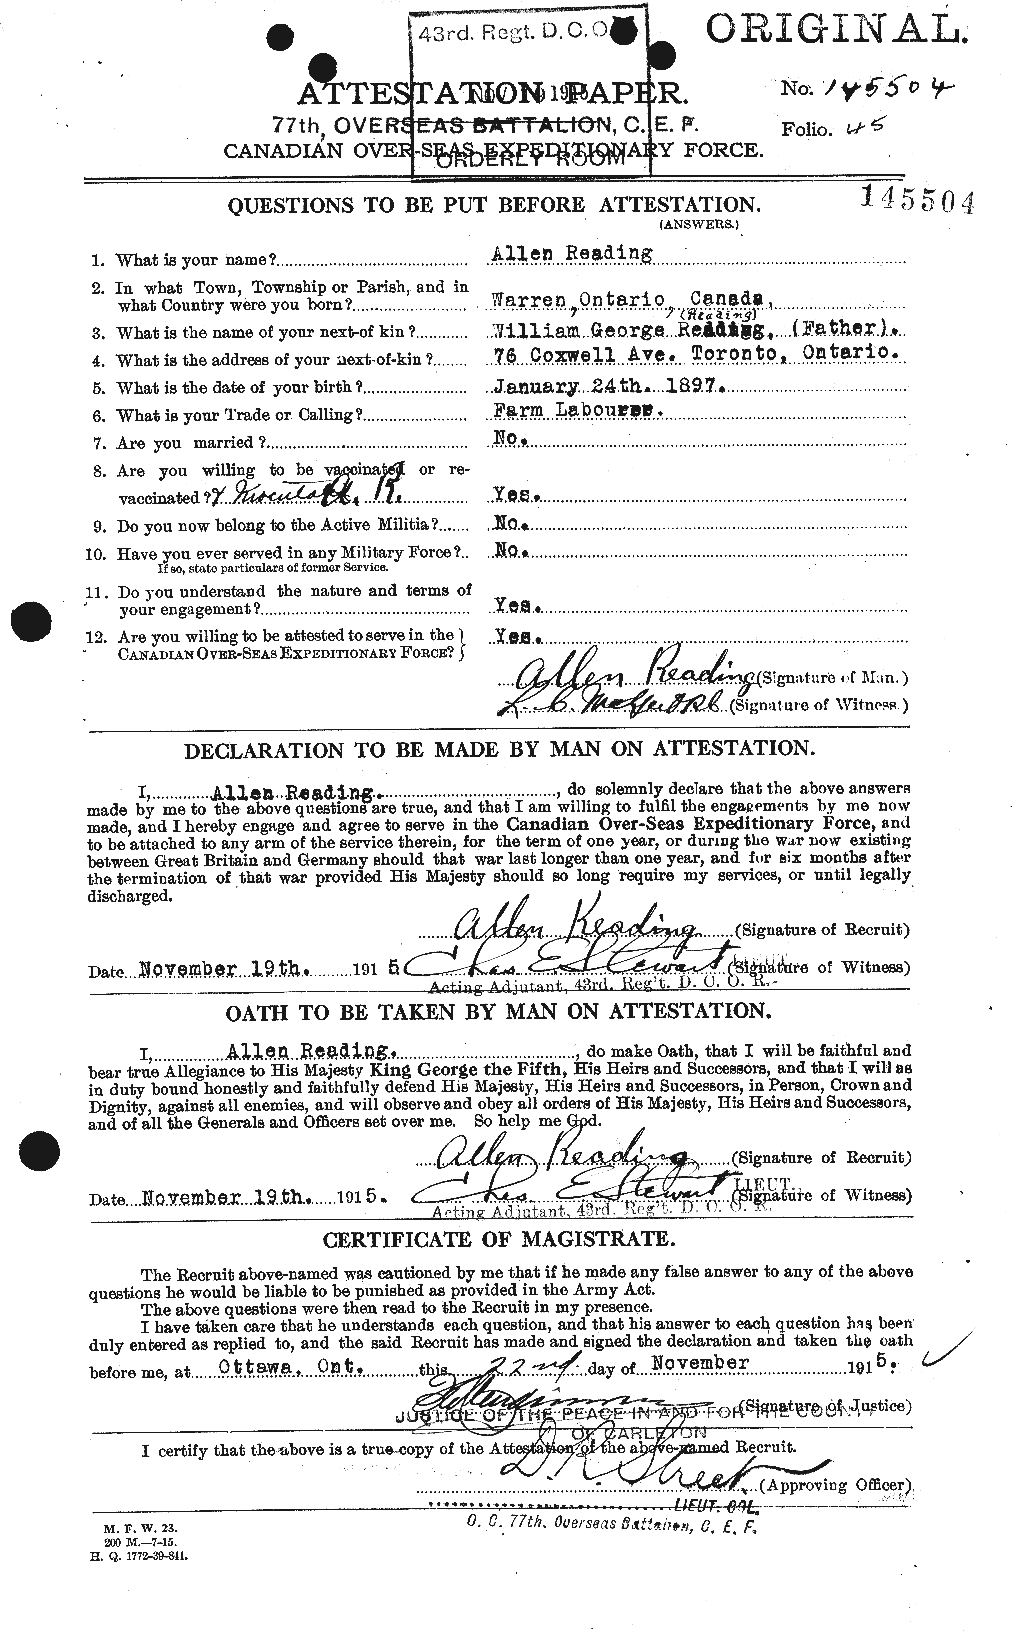 Personnel Records of the First World War - CEF 598402a